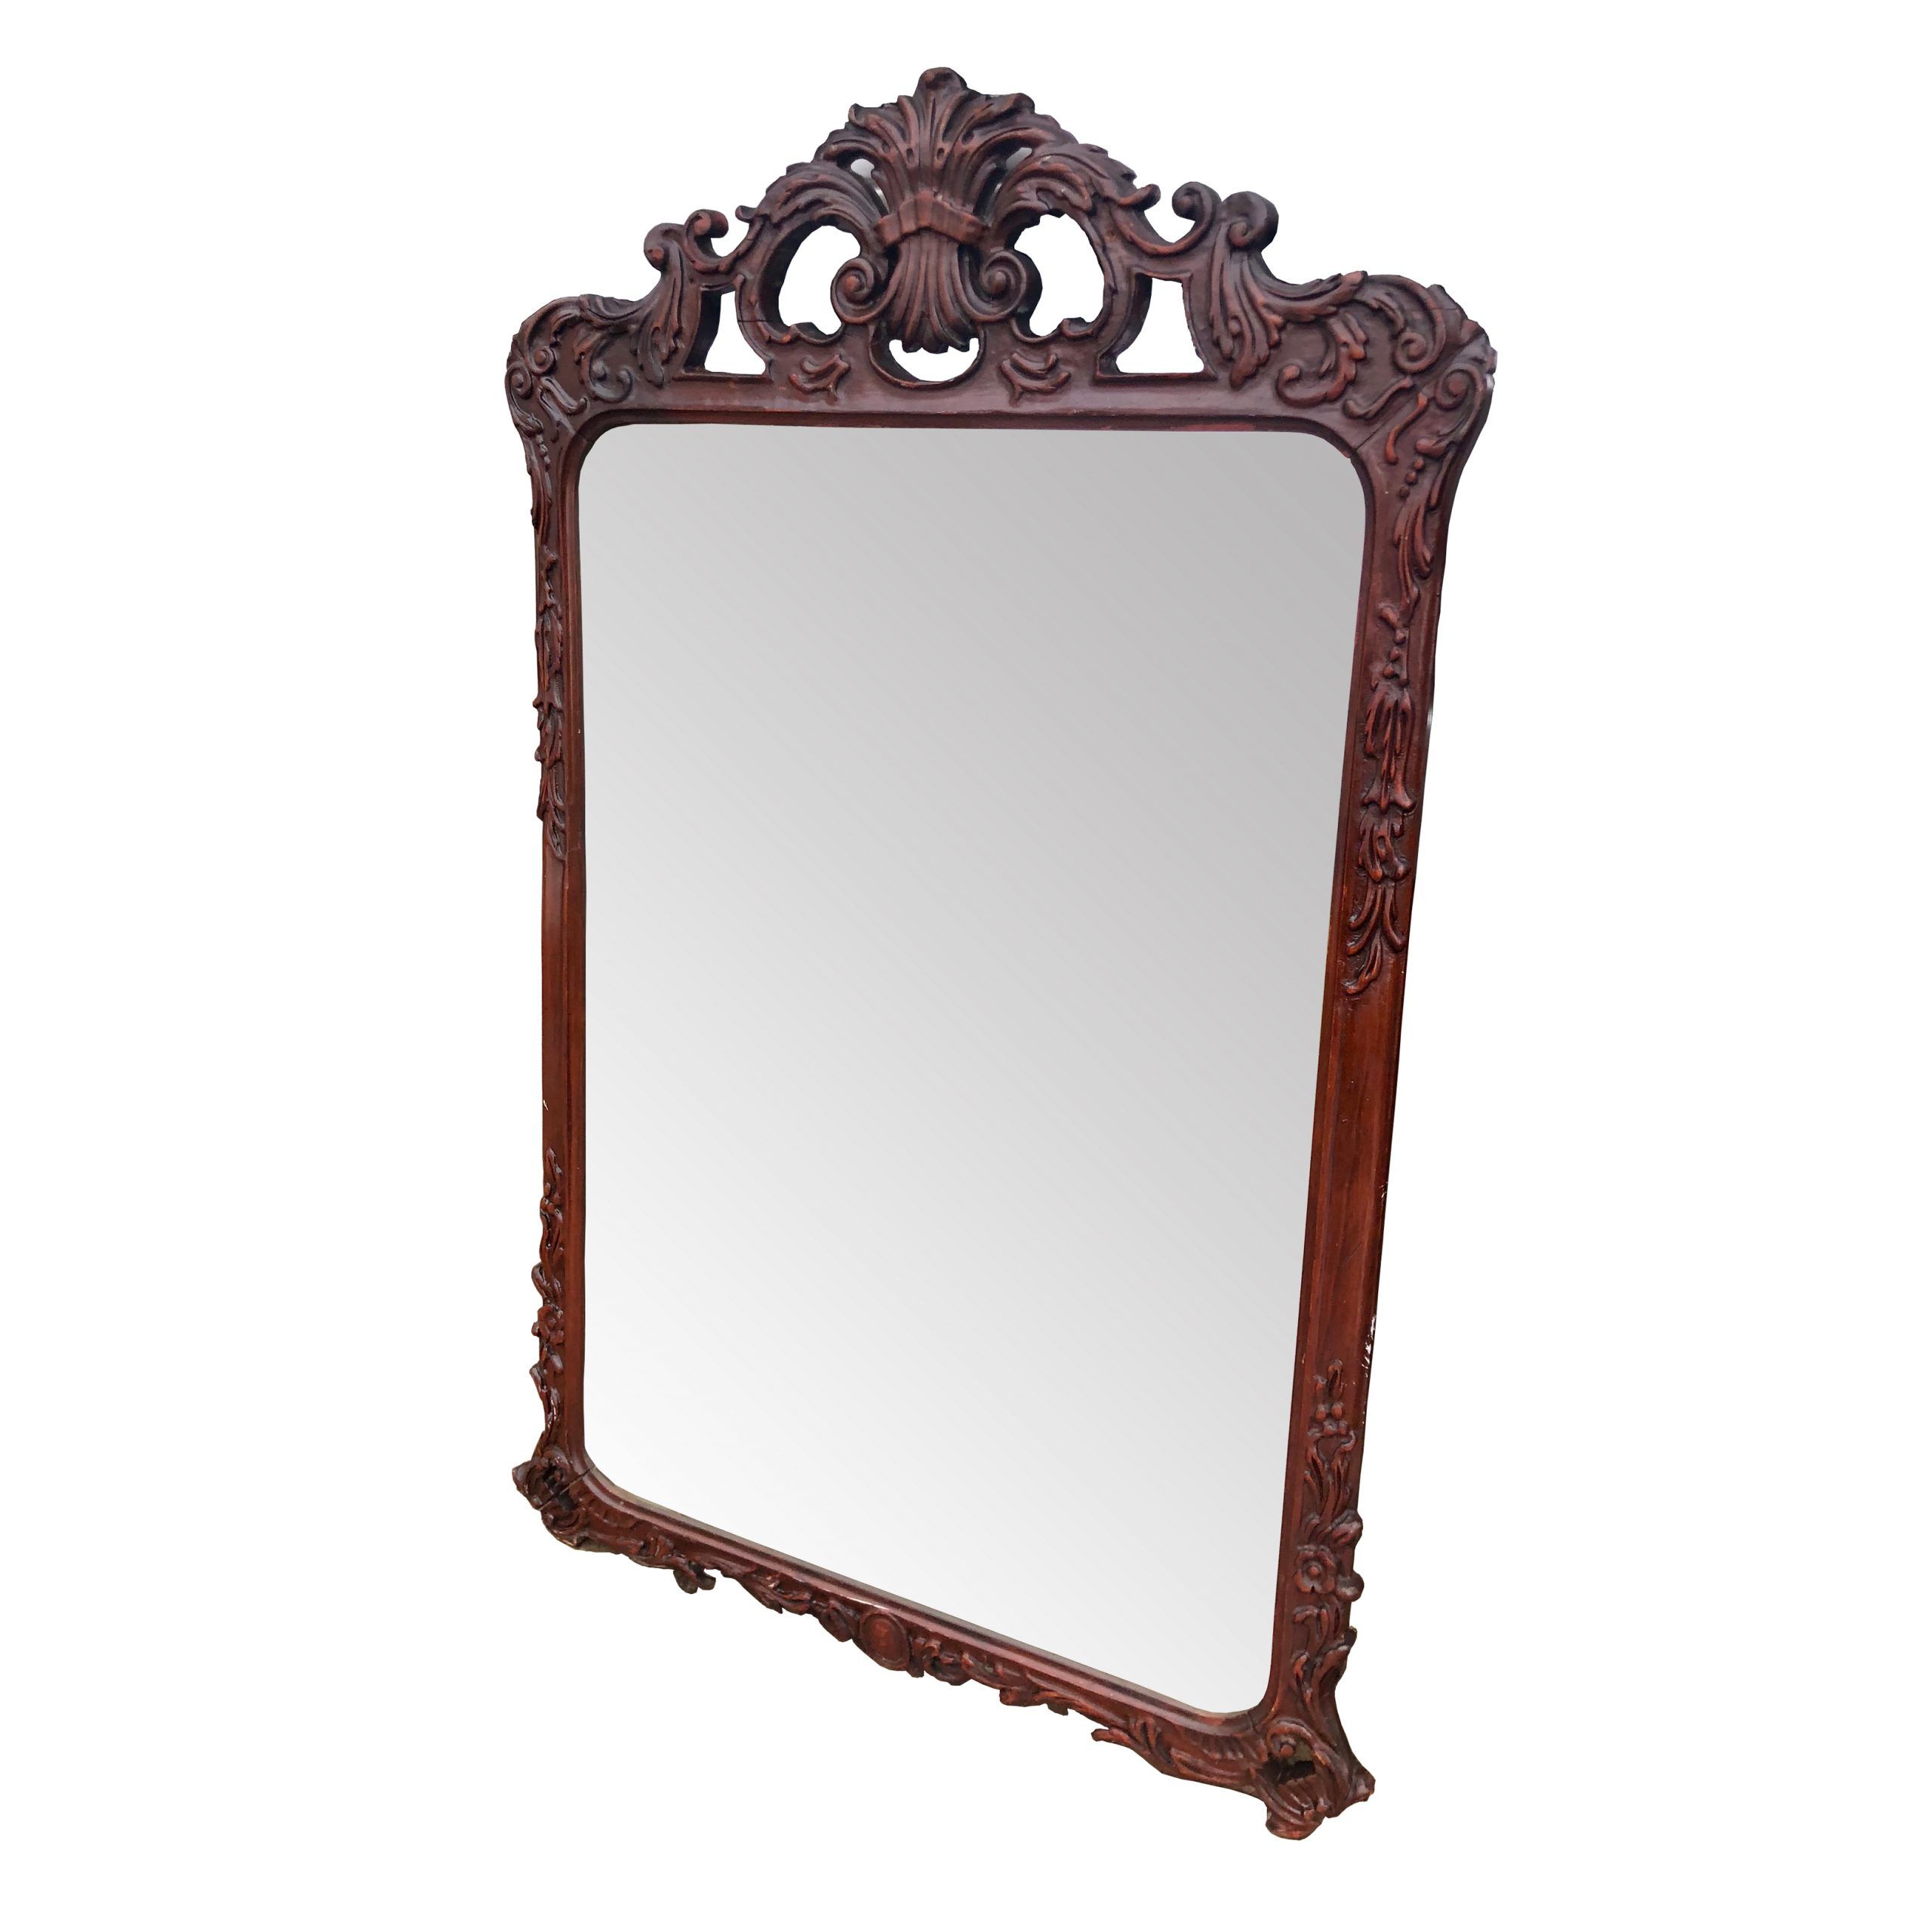 Large Antique Victorian Heavily Carved Walnut Wall Mirror 2X4 In Walnut Wall Mirrors (View 1 of 15)